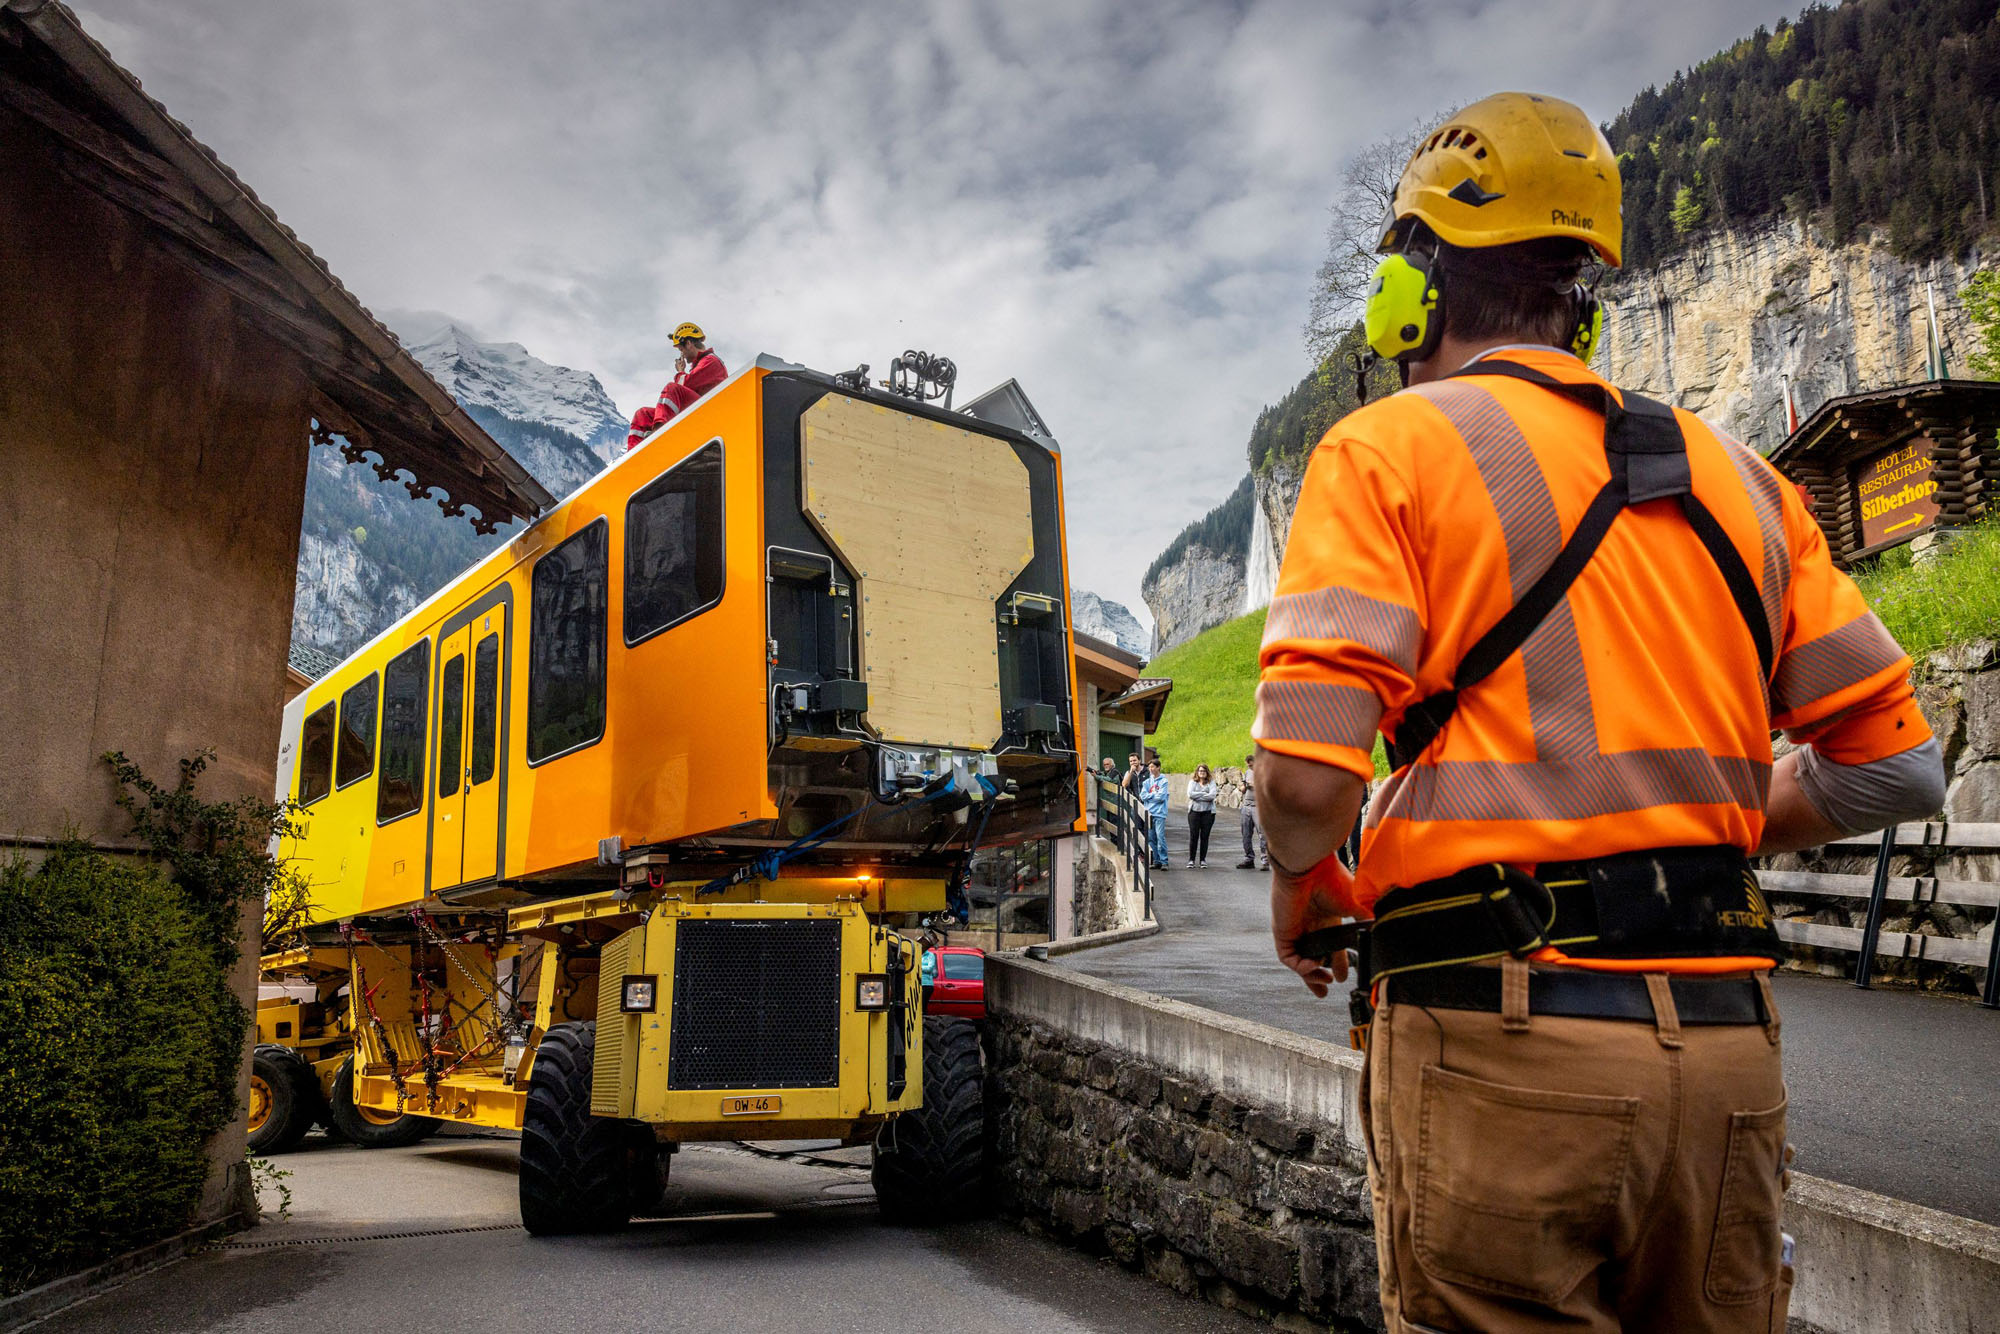 The new rolling stock arrives for the for the Grütschalp-Mürren adhesion railway